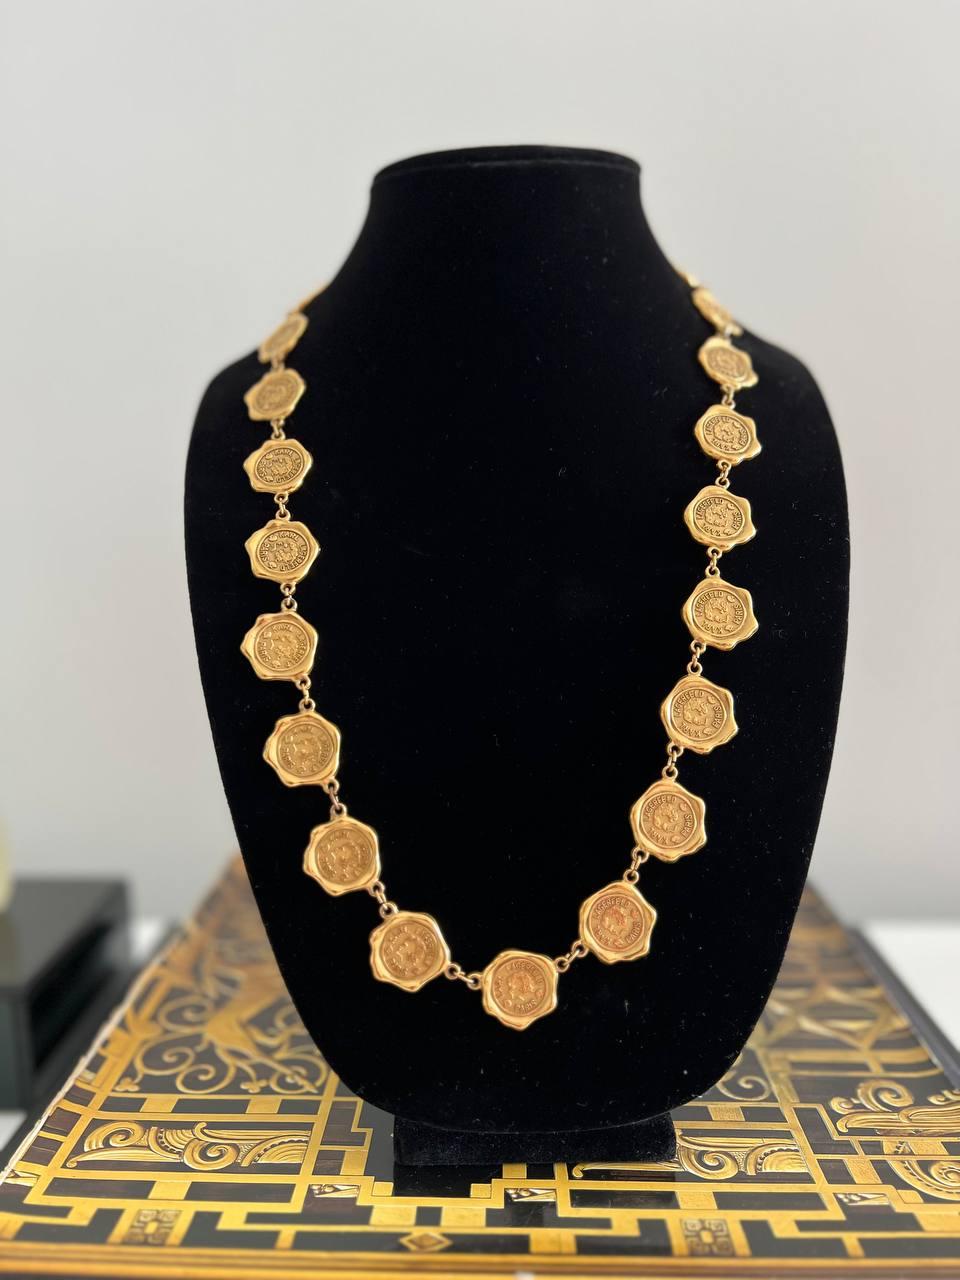 Vintage Karl Lagerfeld runway gold-plated wax coin KL logo seal necklace.

Reversible. KL on one side and Karl Lagerfeld Paris on the back side.

Length – 73 cm

Condition – very good

........Additional information ........

- Photo might be